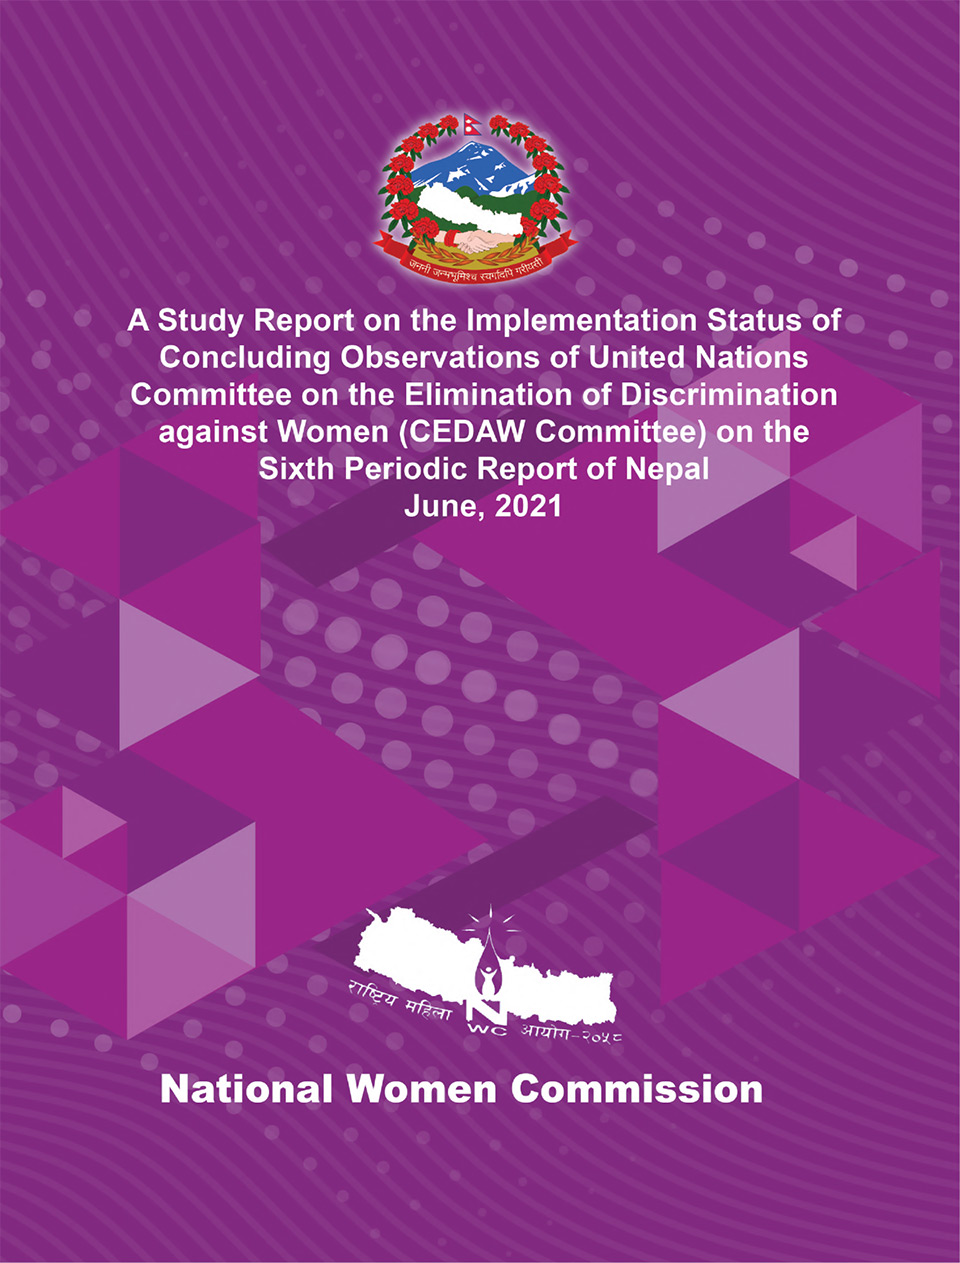 Monitoring progress on the implementation of the 2018, Concluding Observations issued by the CEDAW Committee on the sixth periodic report of Nepal